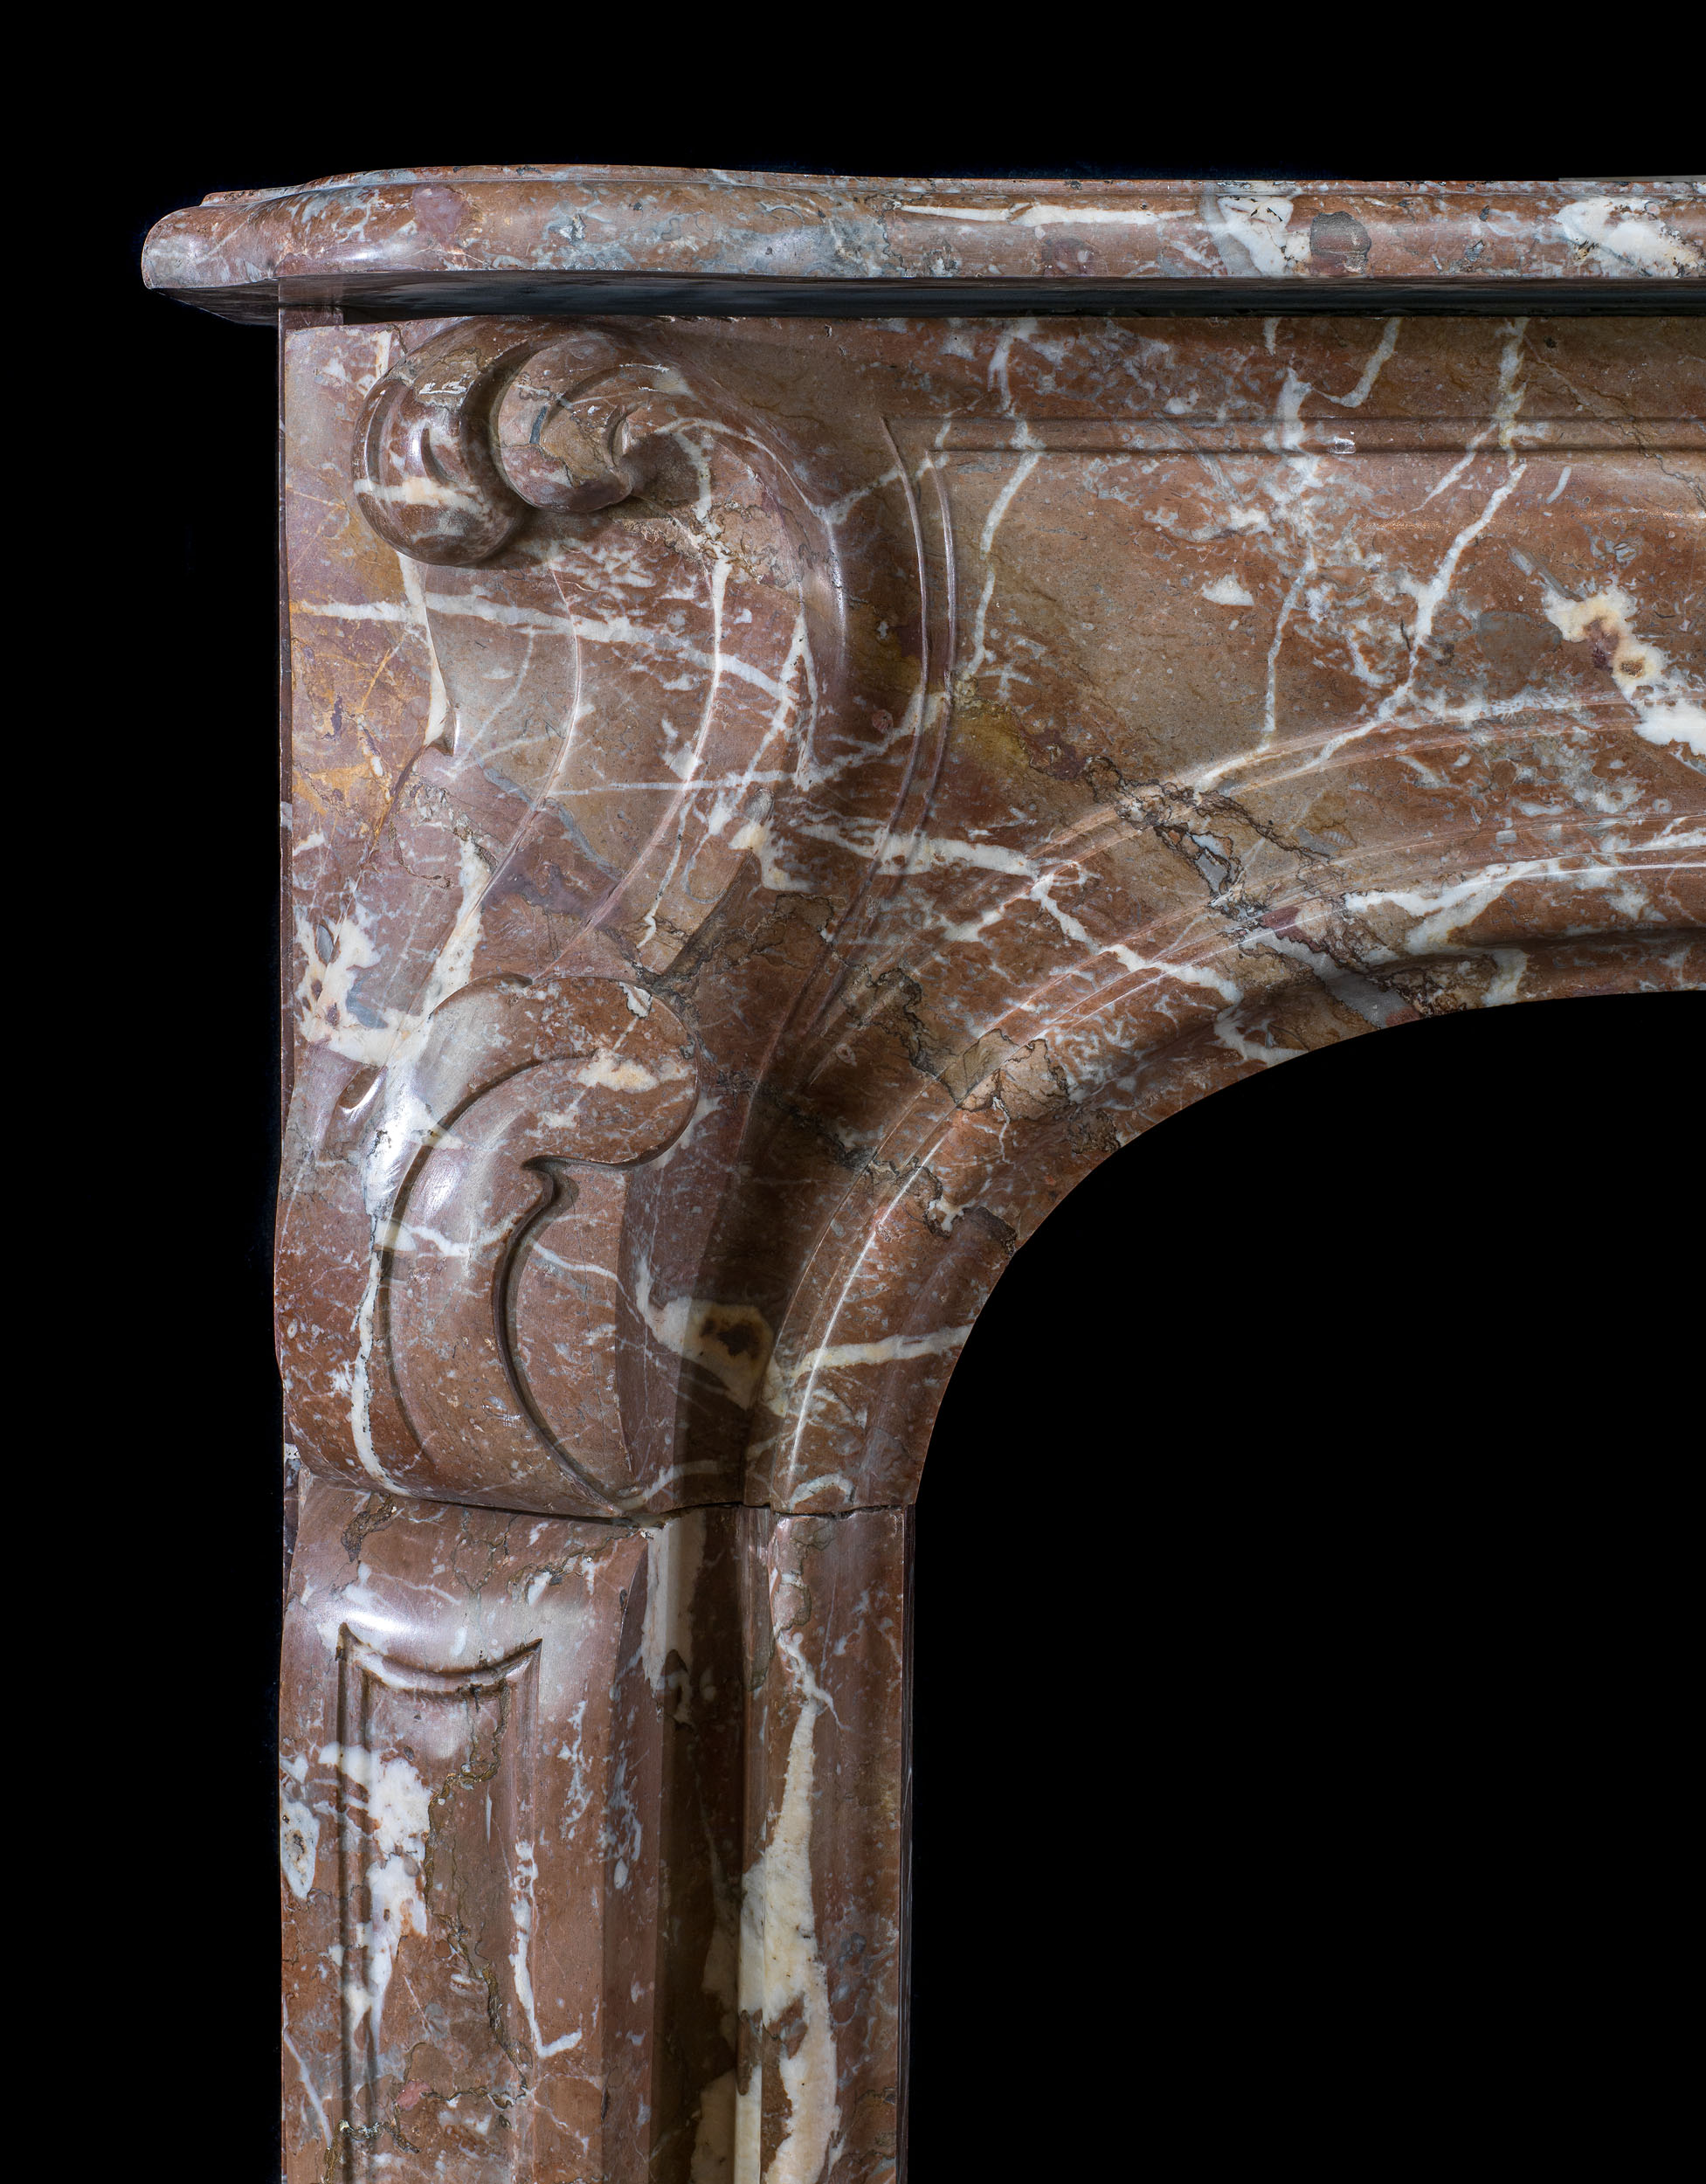 A Rouge Marble Louis XV Chimneypiece
